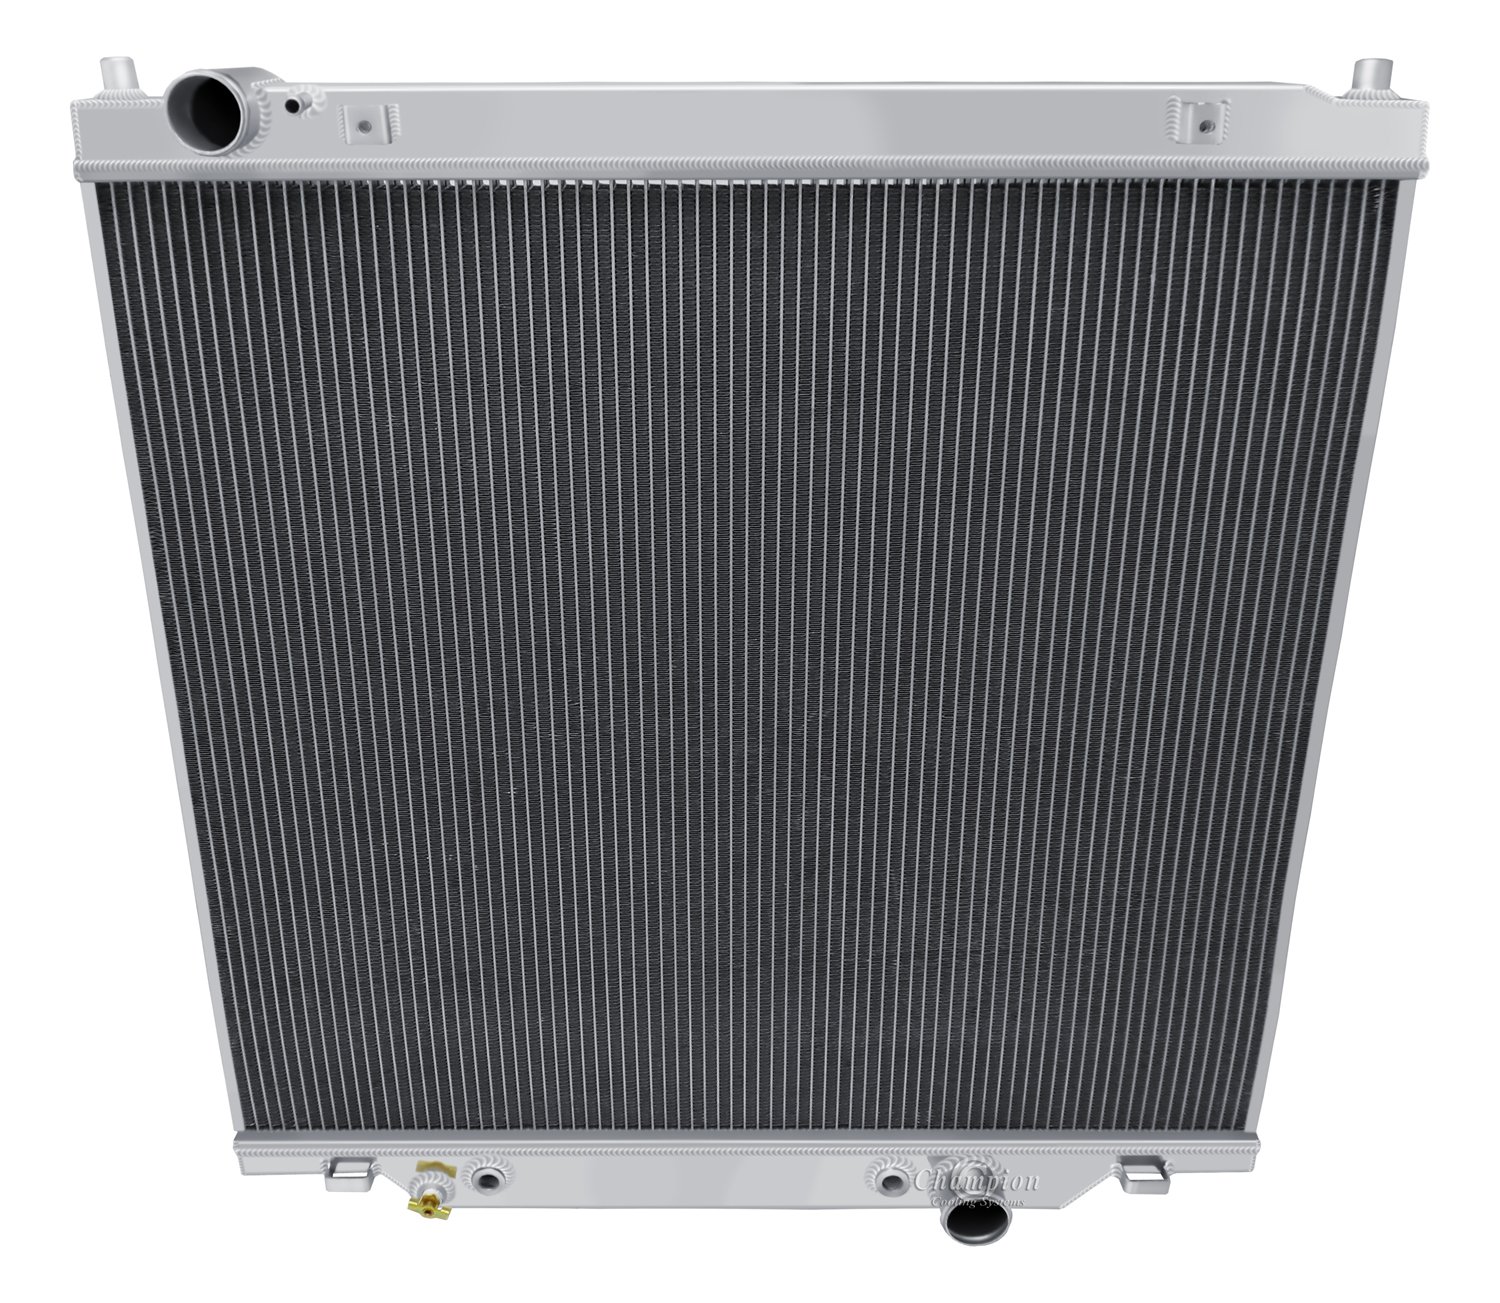 All-Aluminum Replacement Radiator for 2003-2005 Ford Truck/SUV